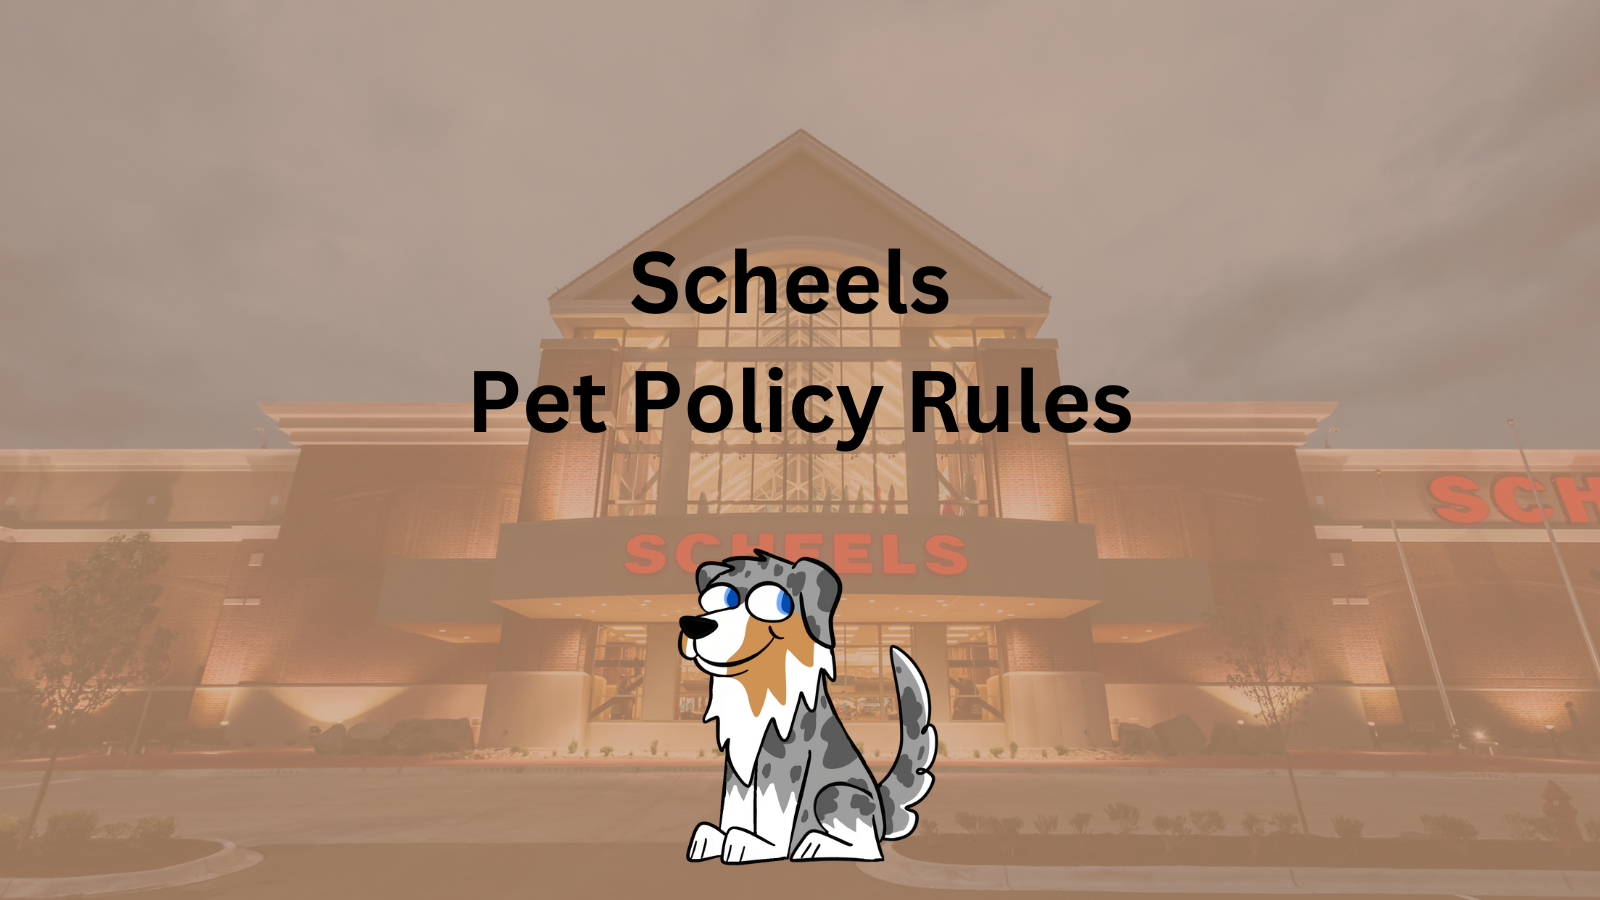 Image Text: "Scheels Pet Policy Rules"